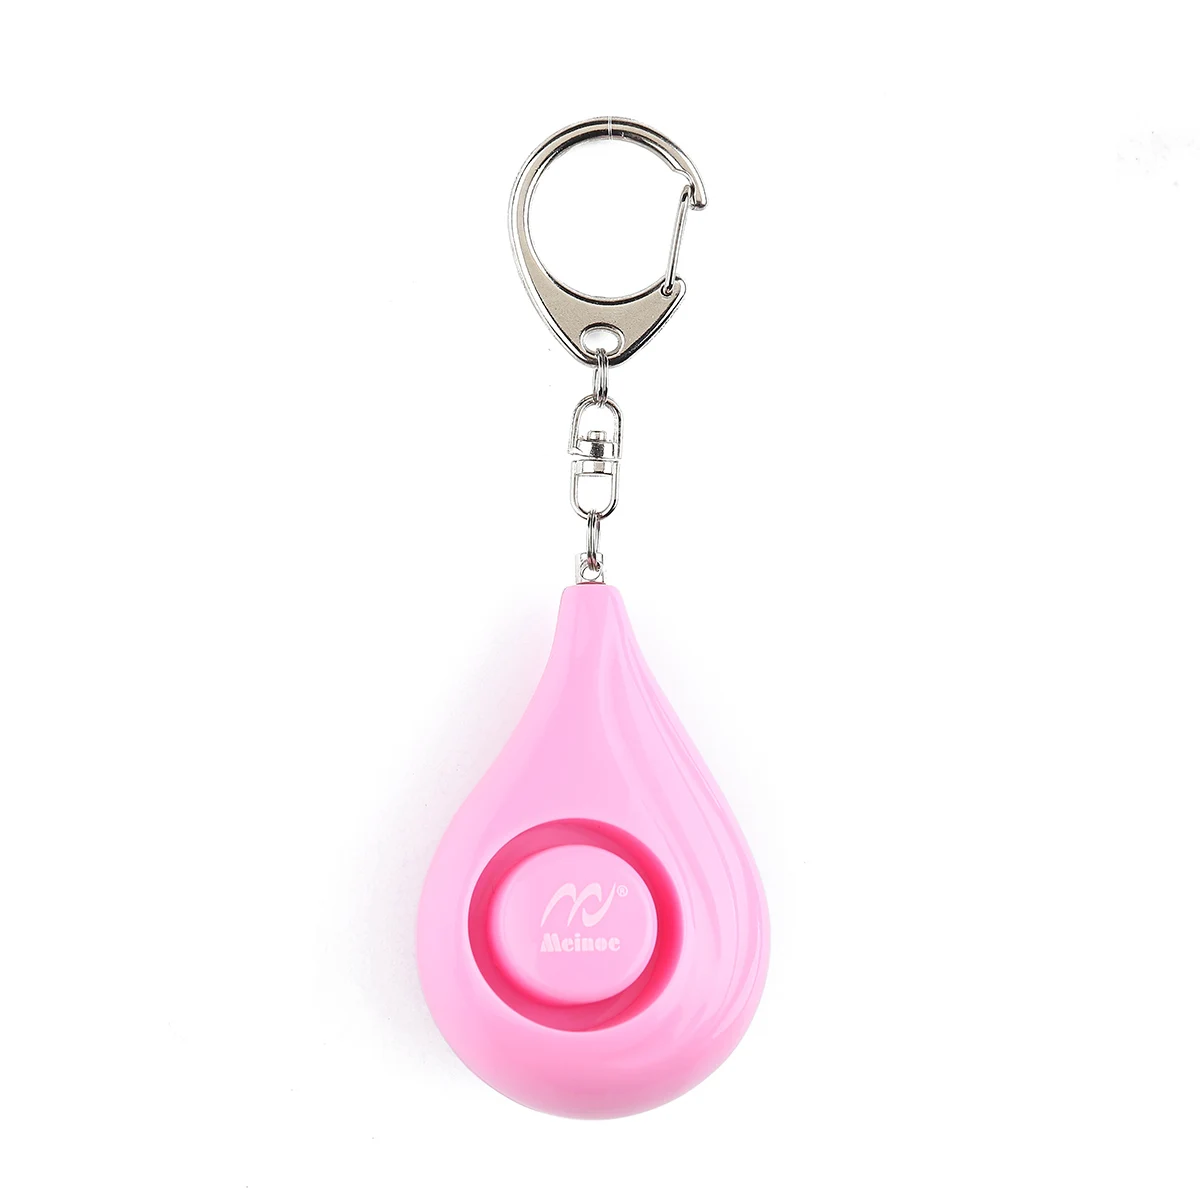 
Meinoe mini portable water drop shaped personal keychain alarm with whistle 